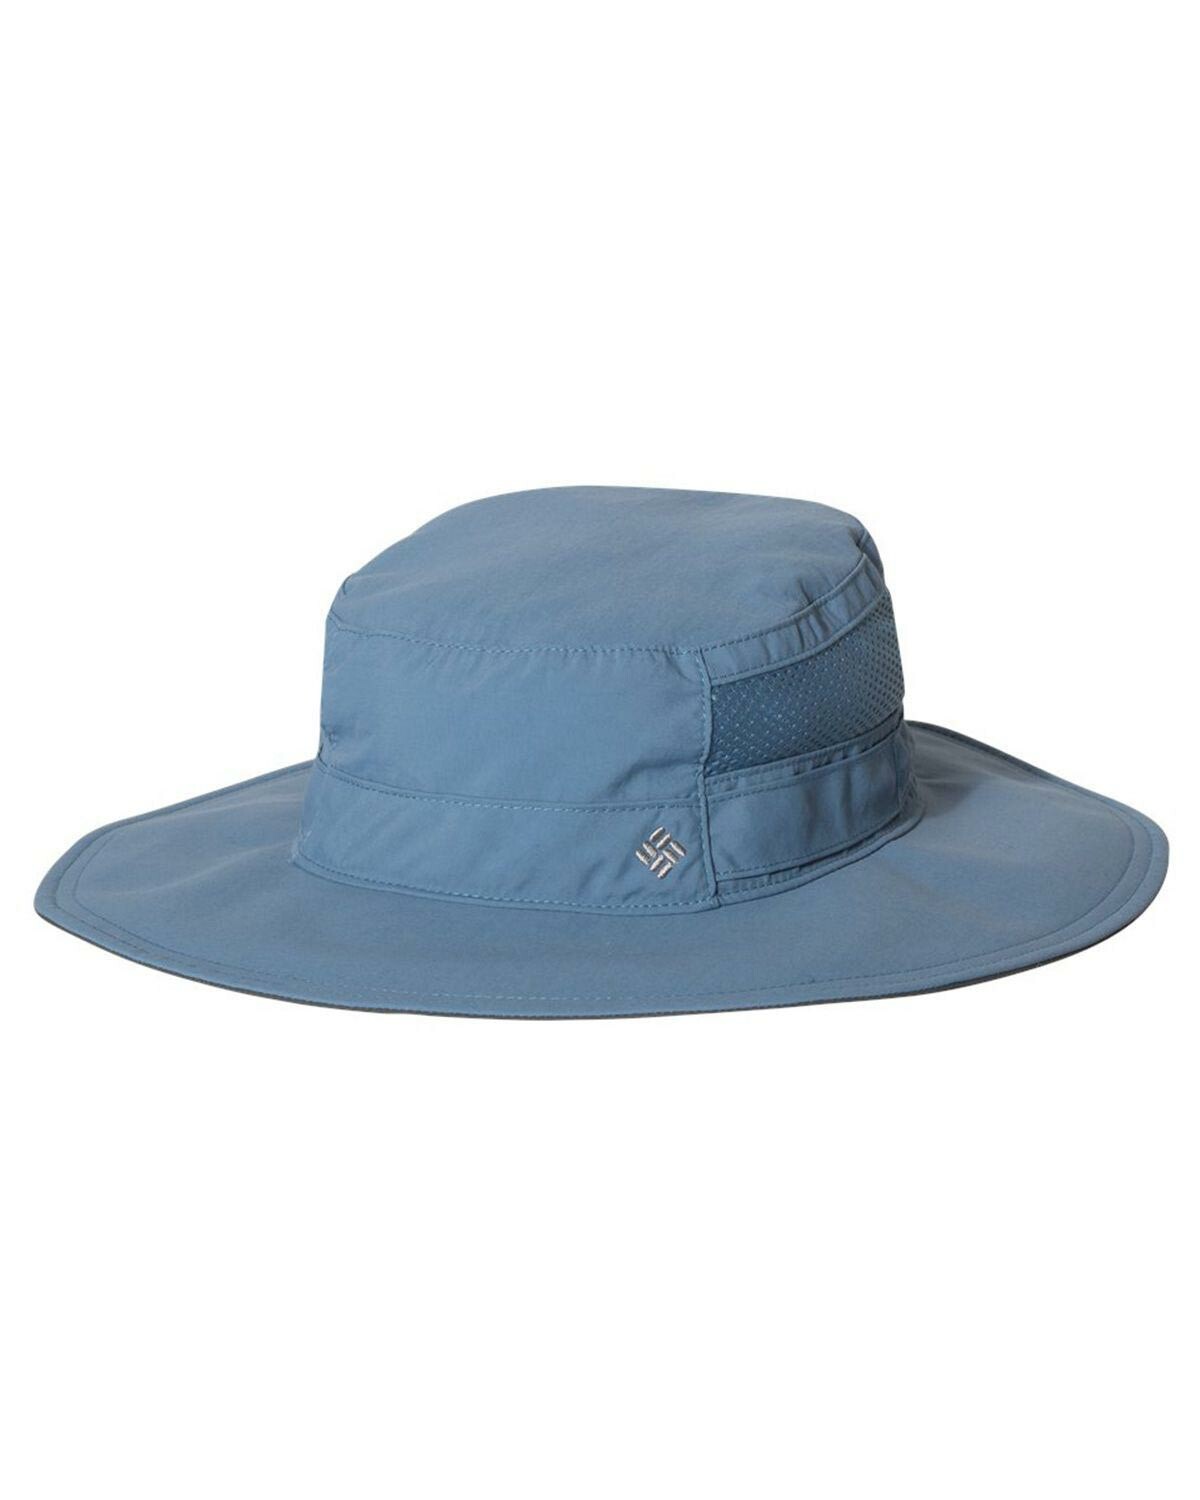 144709 Bora Bora Booney Hat custom embroidered or printed with your logo.